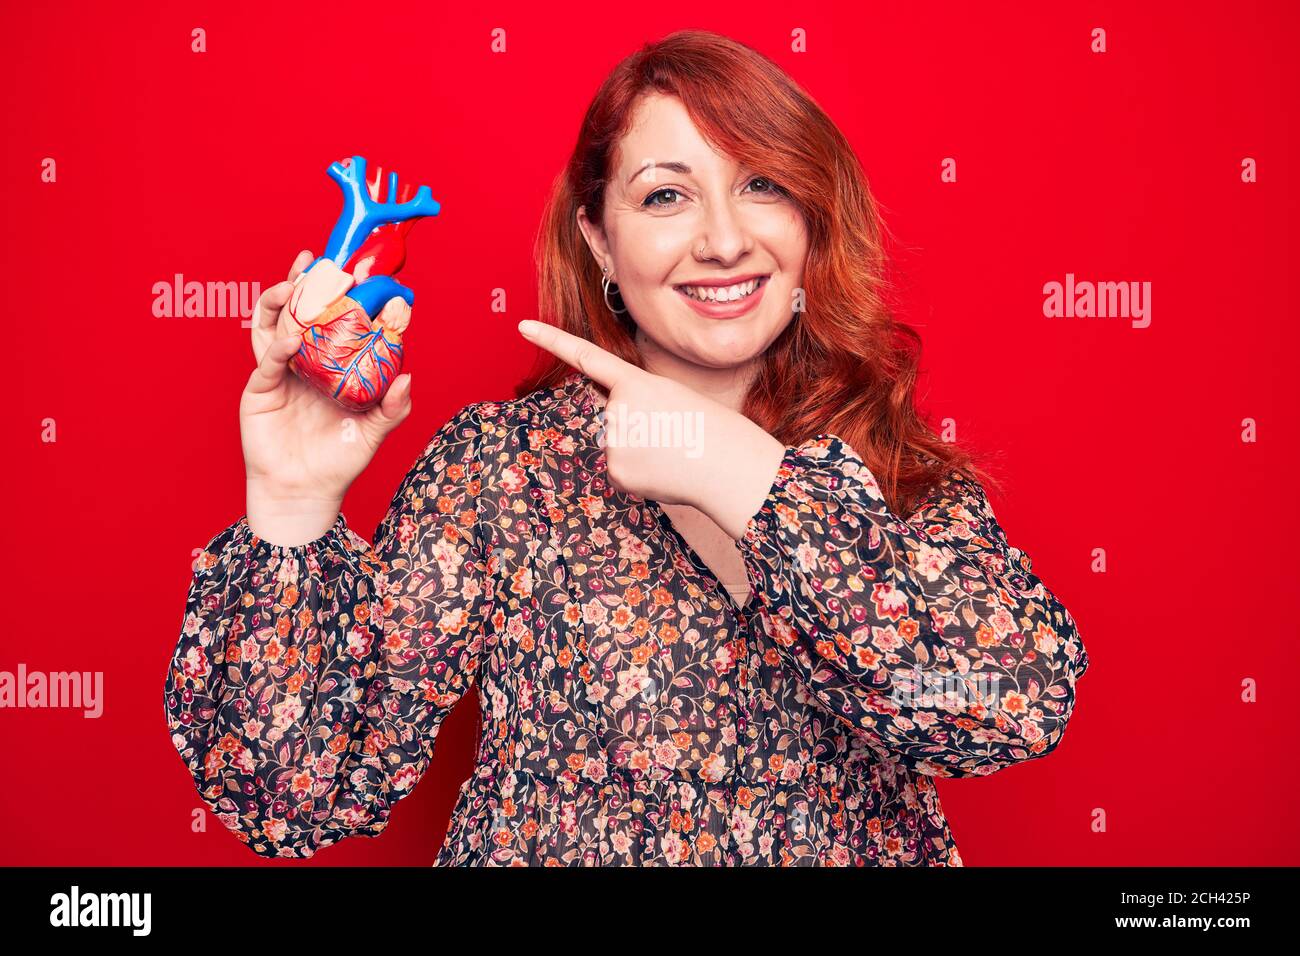 Young beautiful redhead woman asking for health care holding heart over read background smiling happy pointing with hand and finger Stock Photo